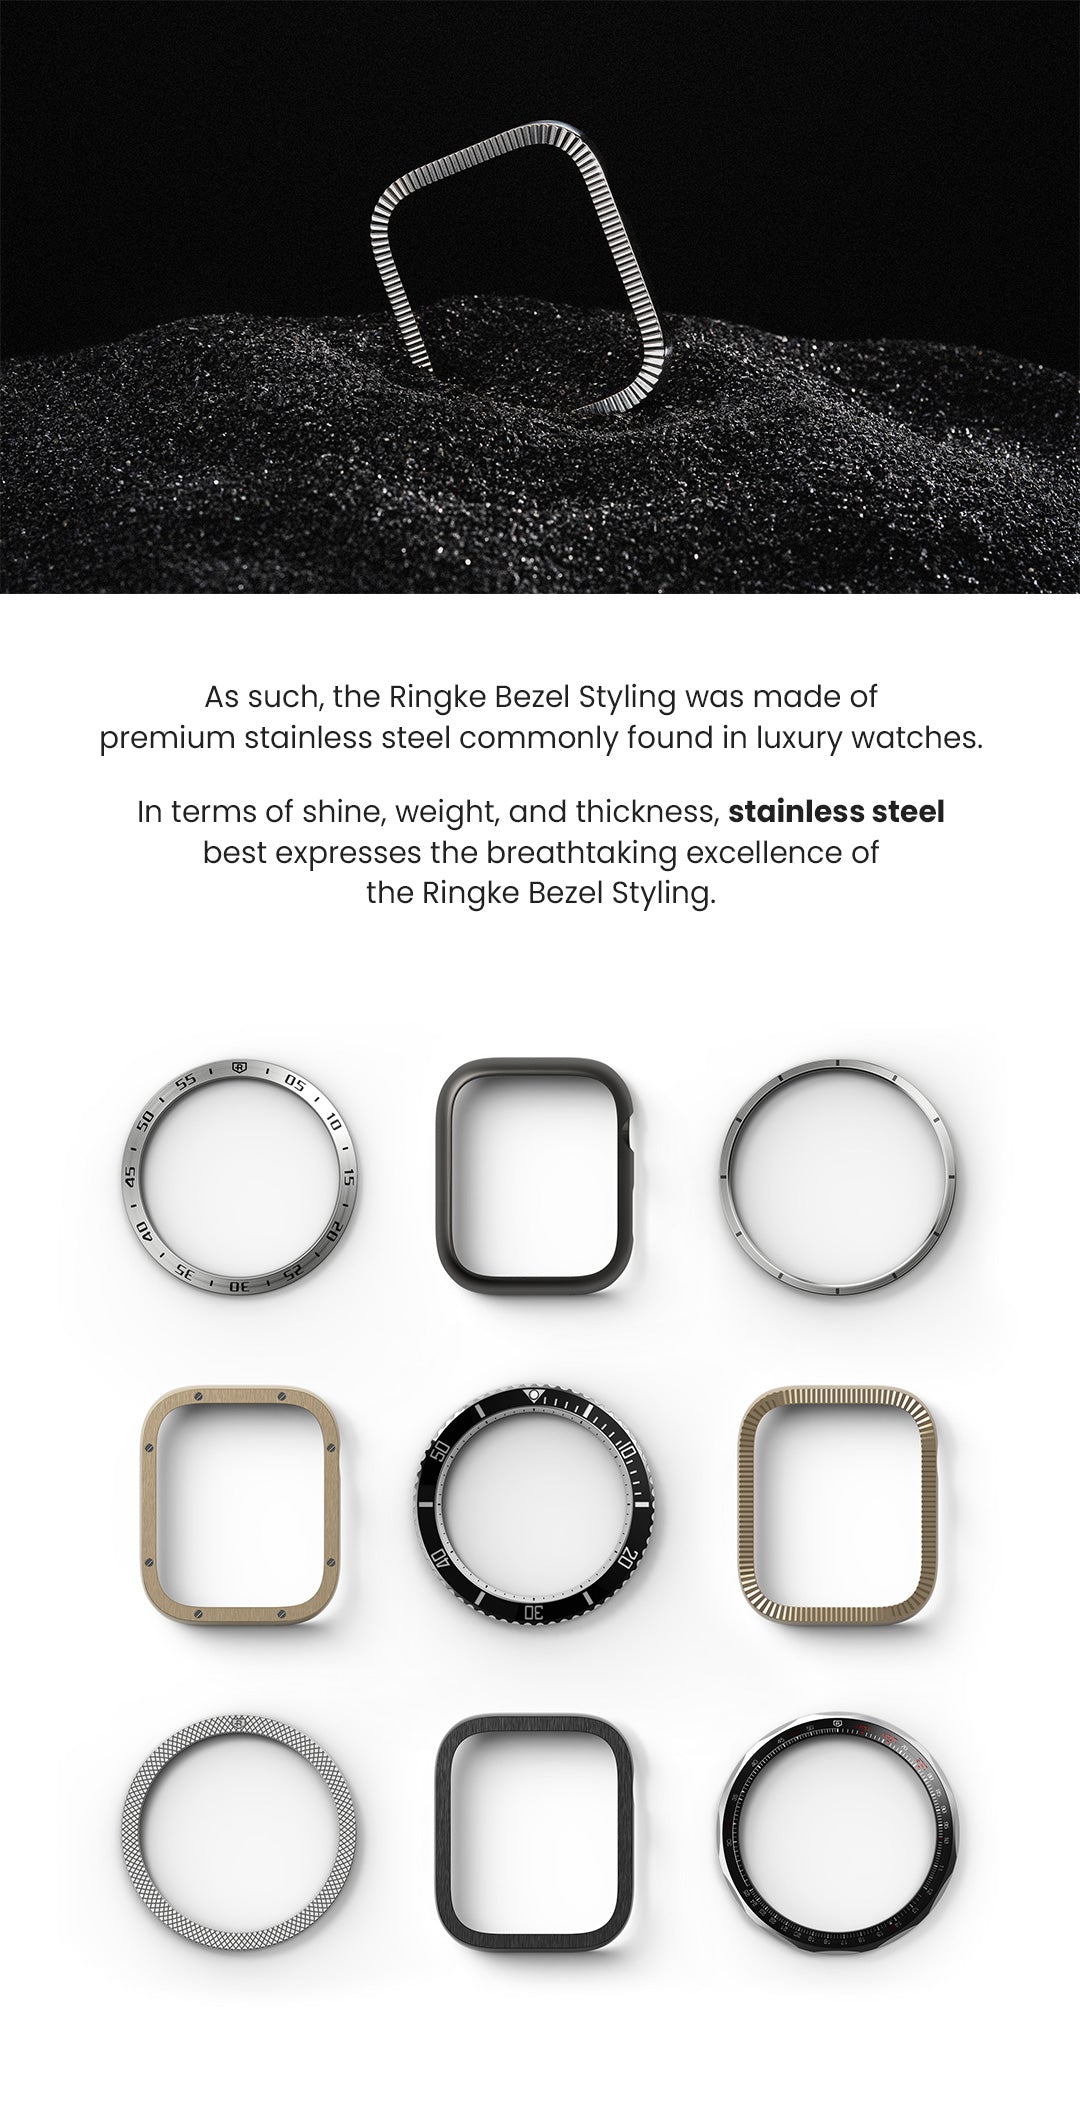 As such, the Ringke Bezel Styling was made of premium stainless steel commonly found in luxury watches. In terms of shine, weight, and thickness, stainless steel best expresses the breathtaking excellence of the Ringke Bezel Styling.